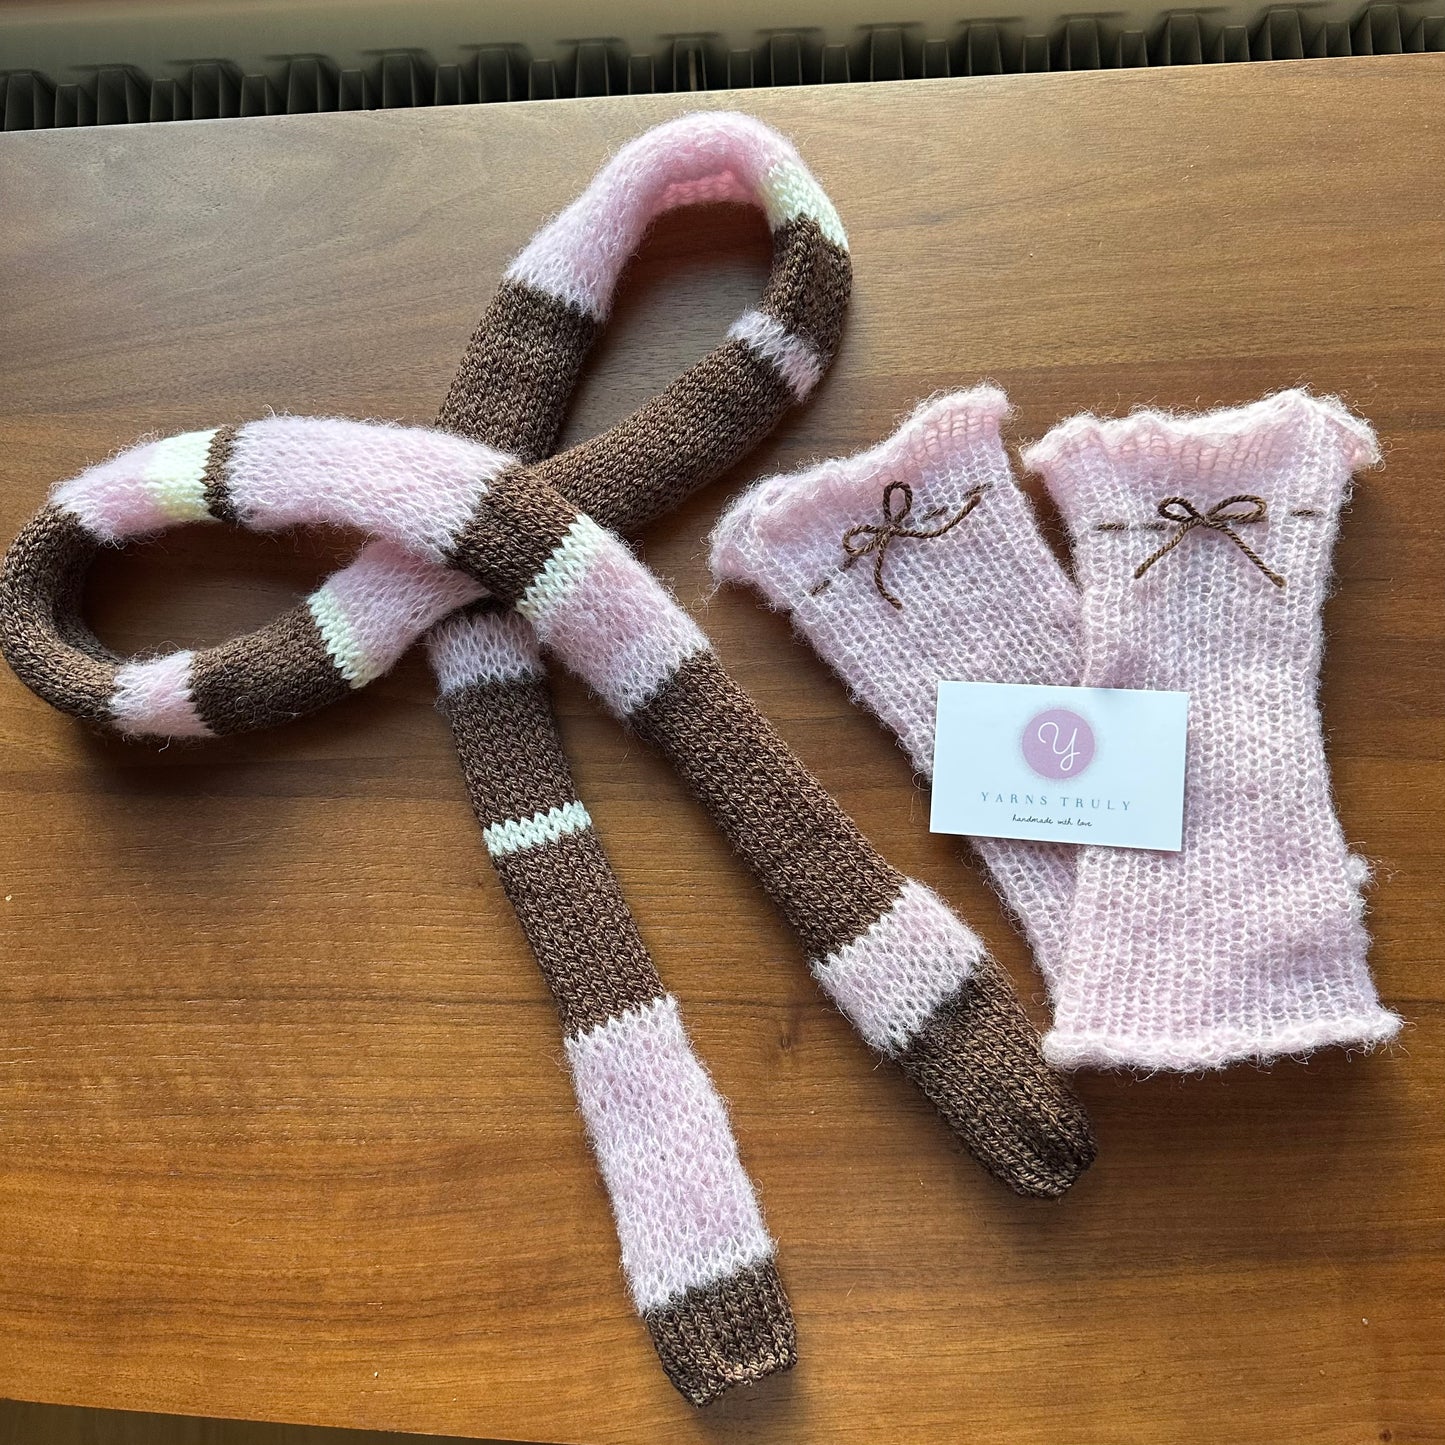 Handmade knitted brown, cream and baby pink striped skinny scarf